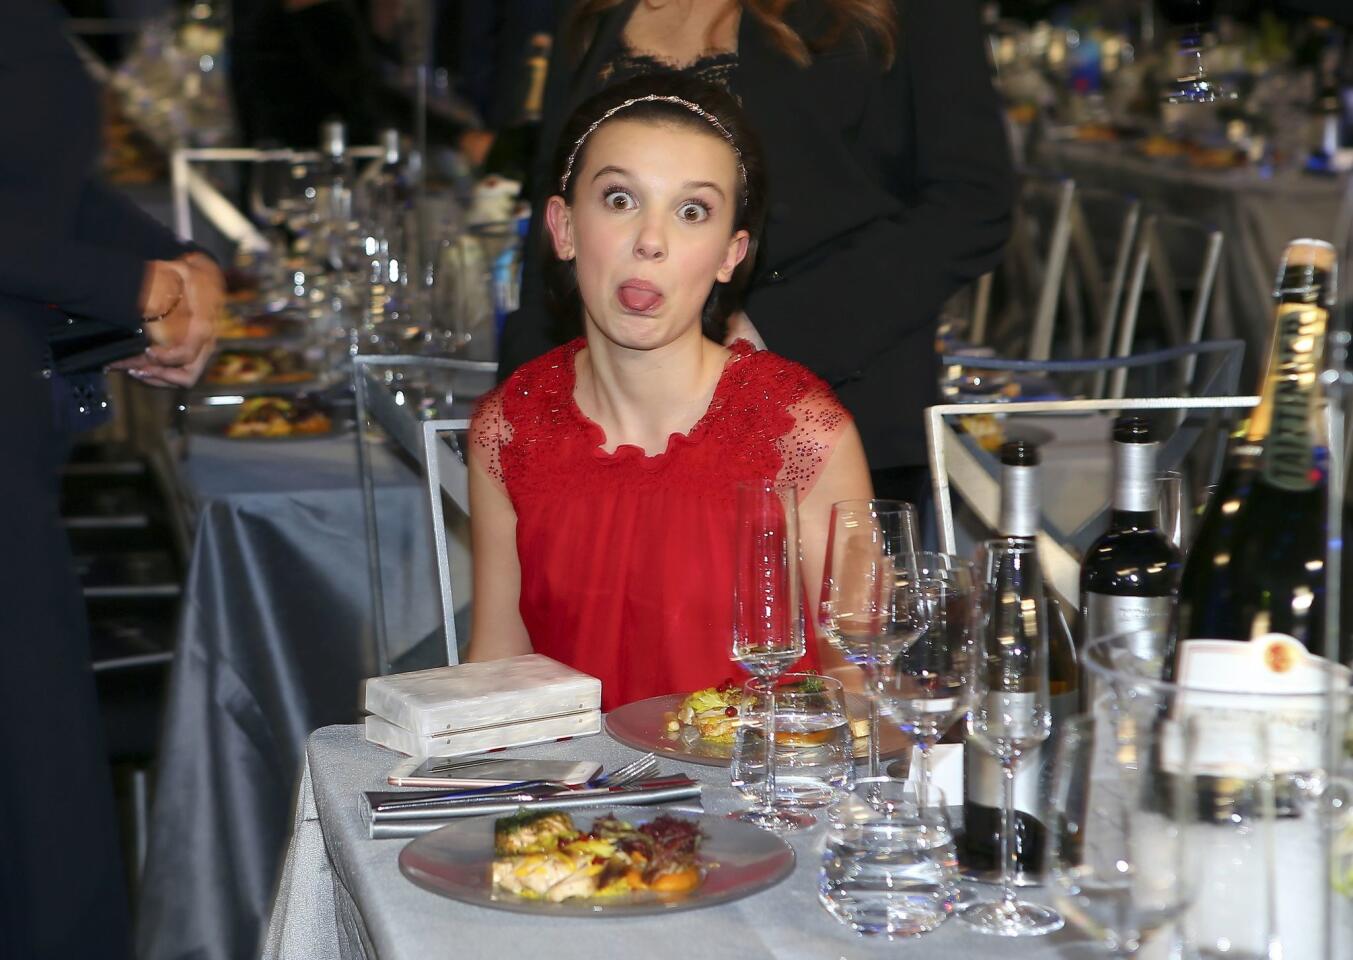 Millie Bobby Brown attends the 23rd Screen Actors Guild Awards in Los Angeles